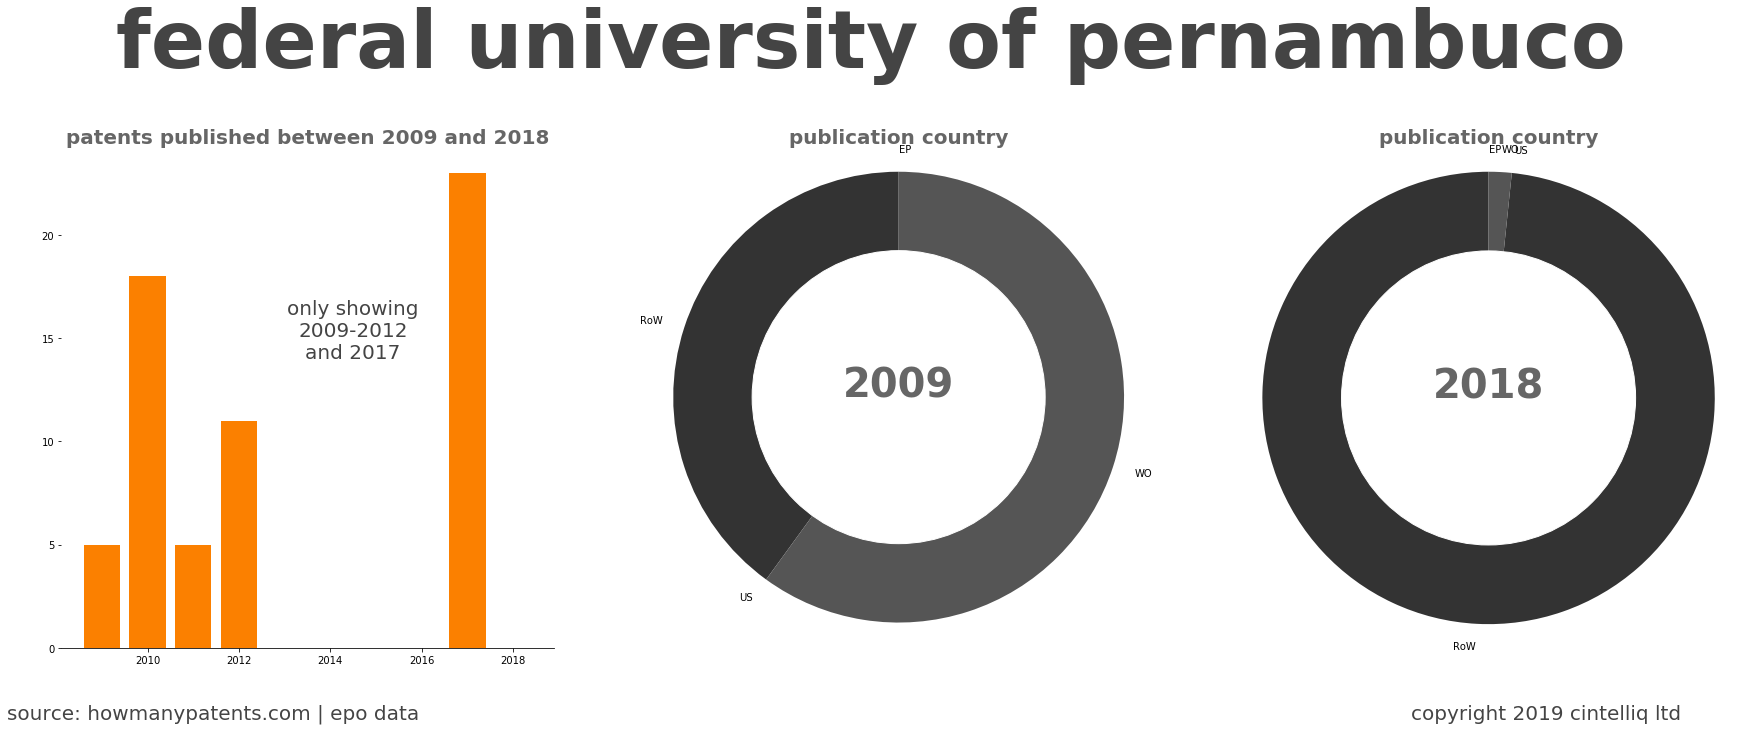 summary of patents for Federal University Of Pernambuco